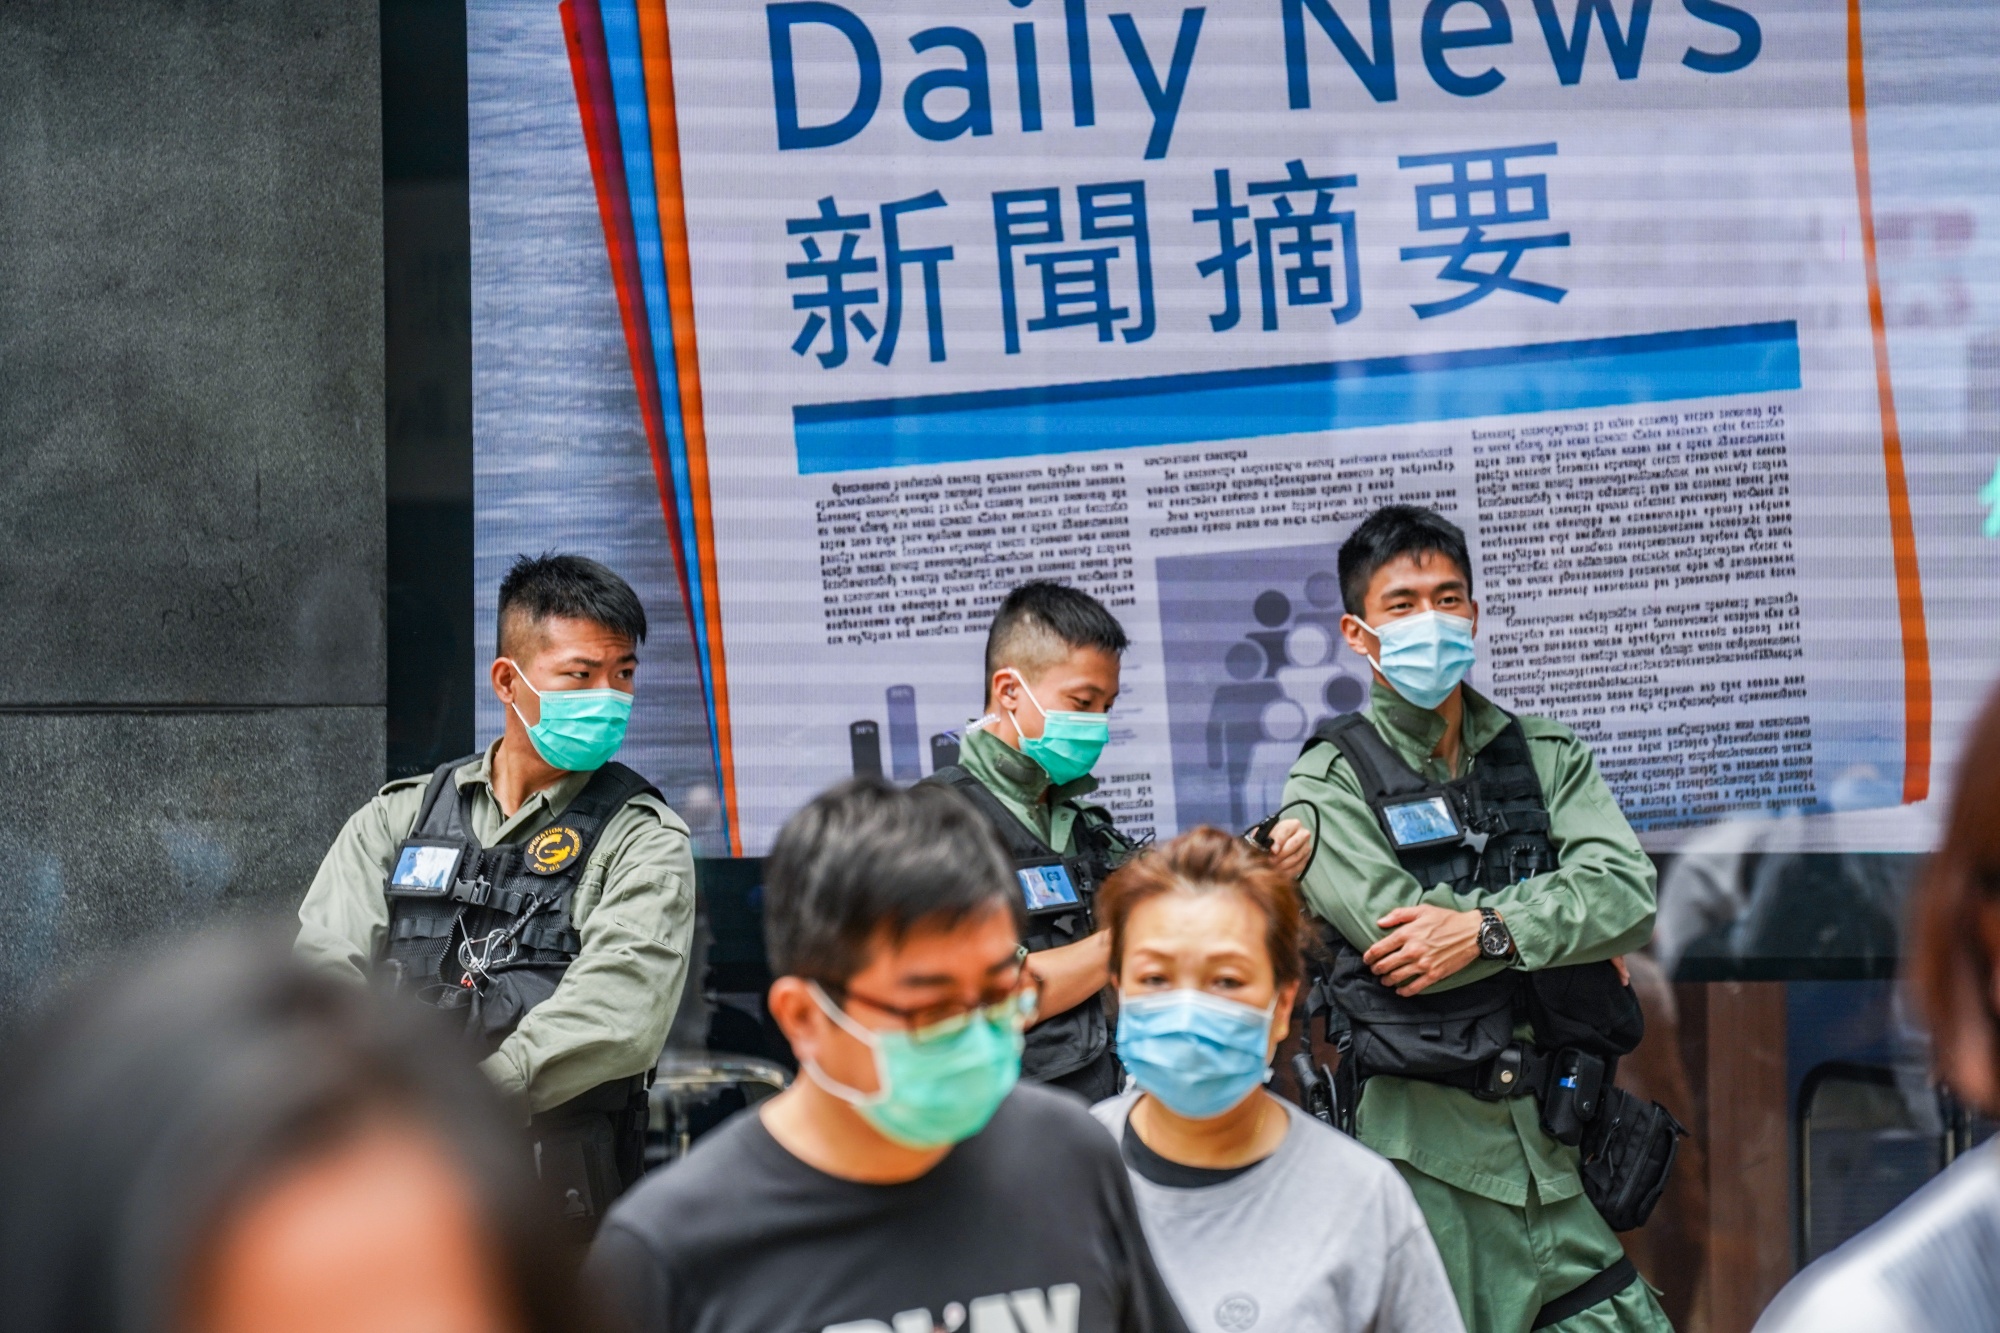 Riot police stand guard in the Central district ahead of an anticipated lunchtime protest in Hong Kong, on May 29.